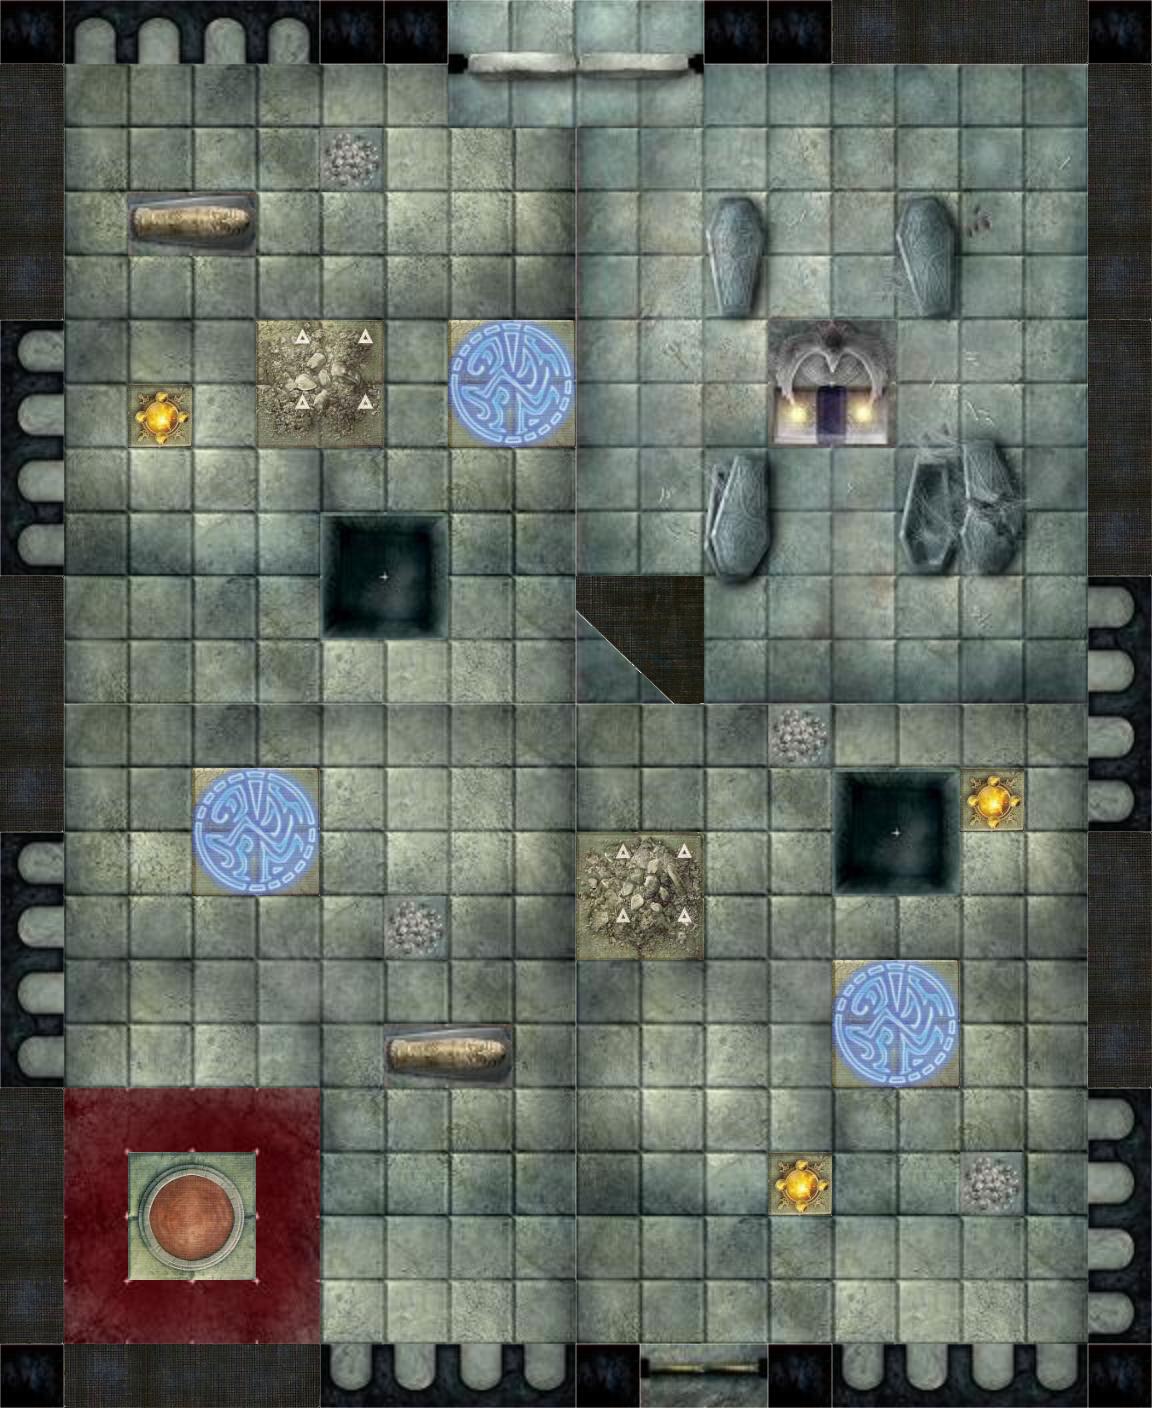 encounter any views on this puzzle combat en world dungeons dragons tabletop roleplaying games